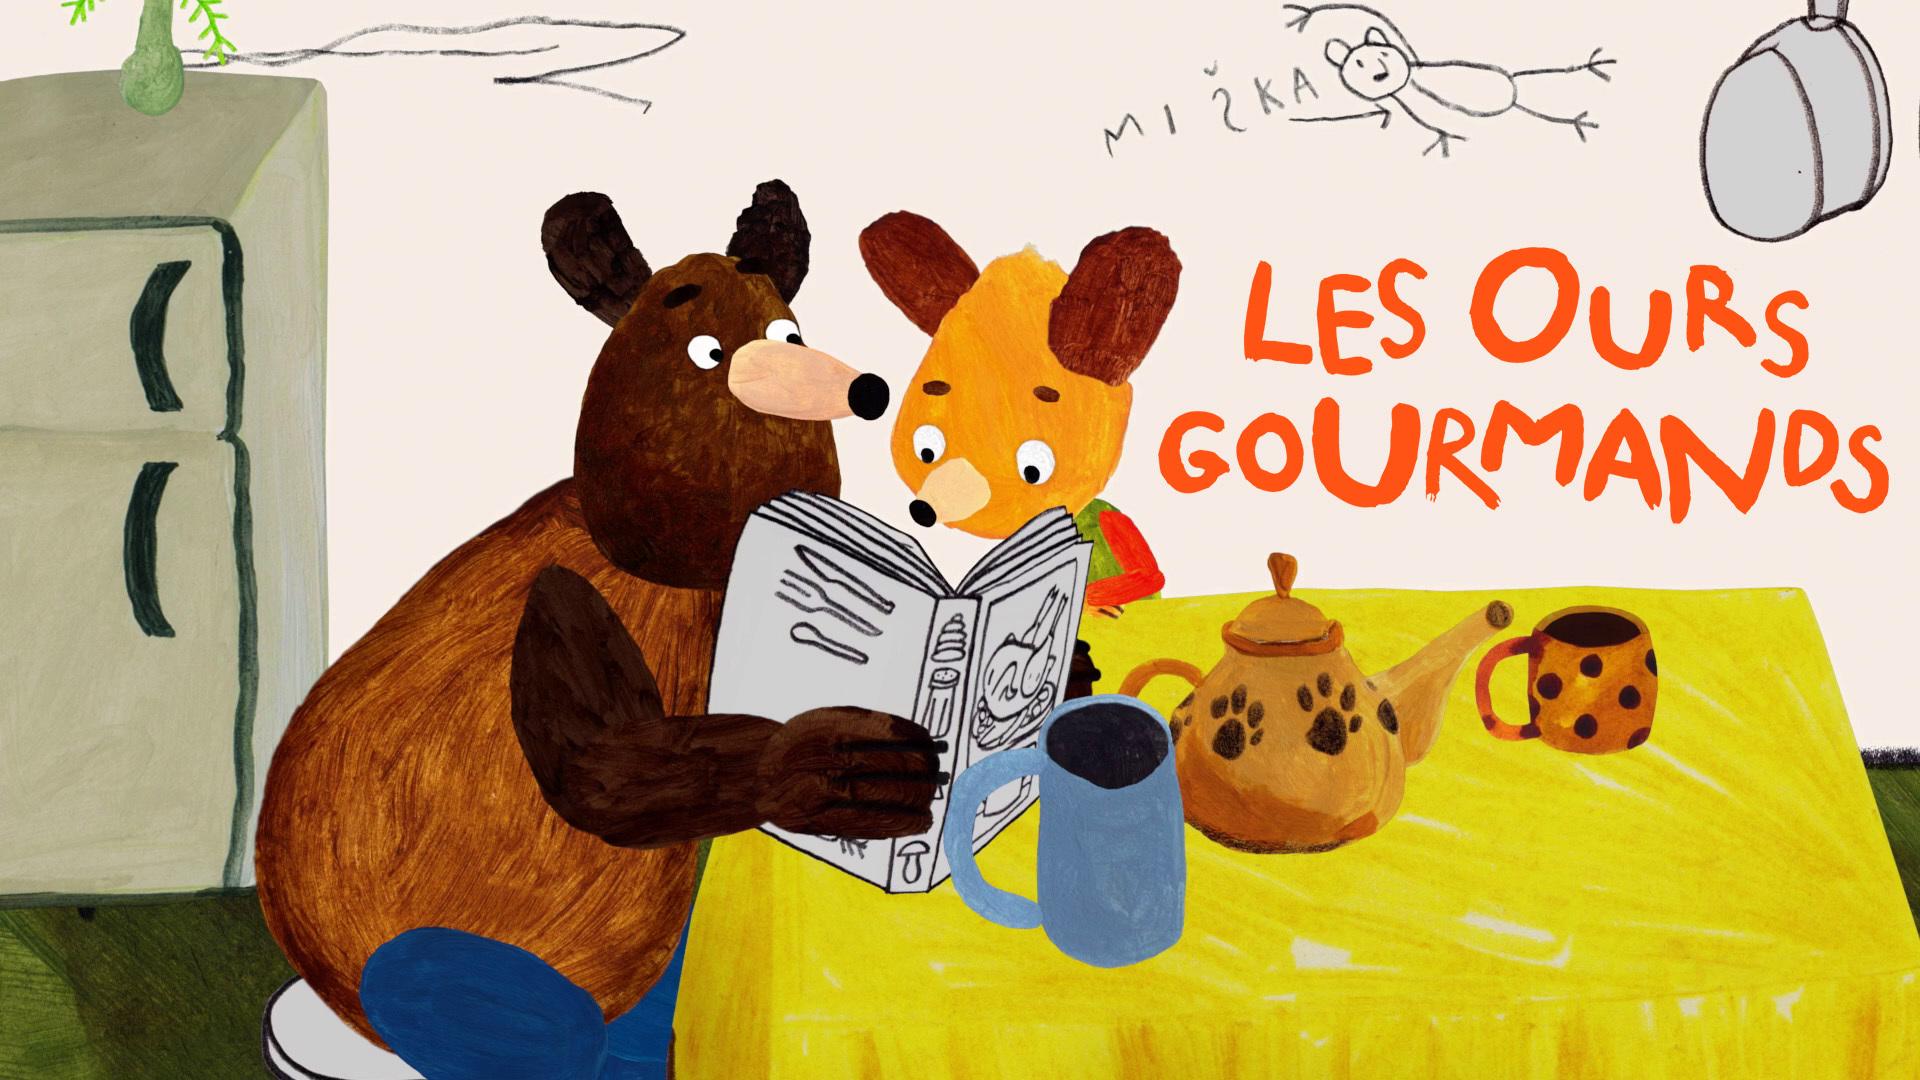 Les Ours Gourmands